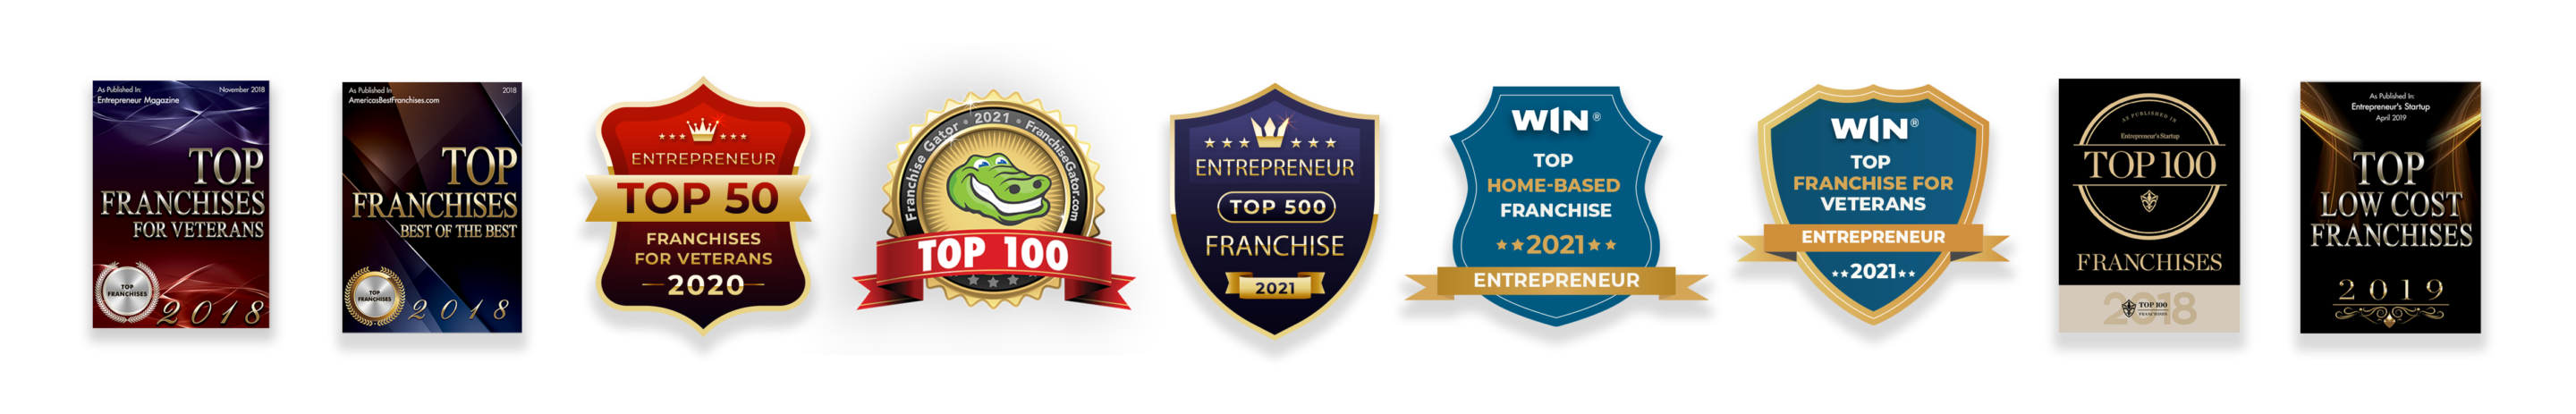 WIN Home Inspection is Top Rated Franchise